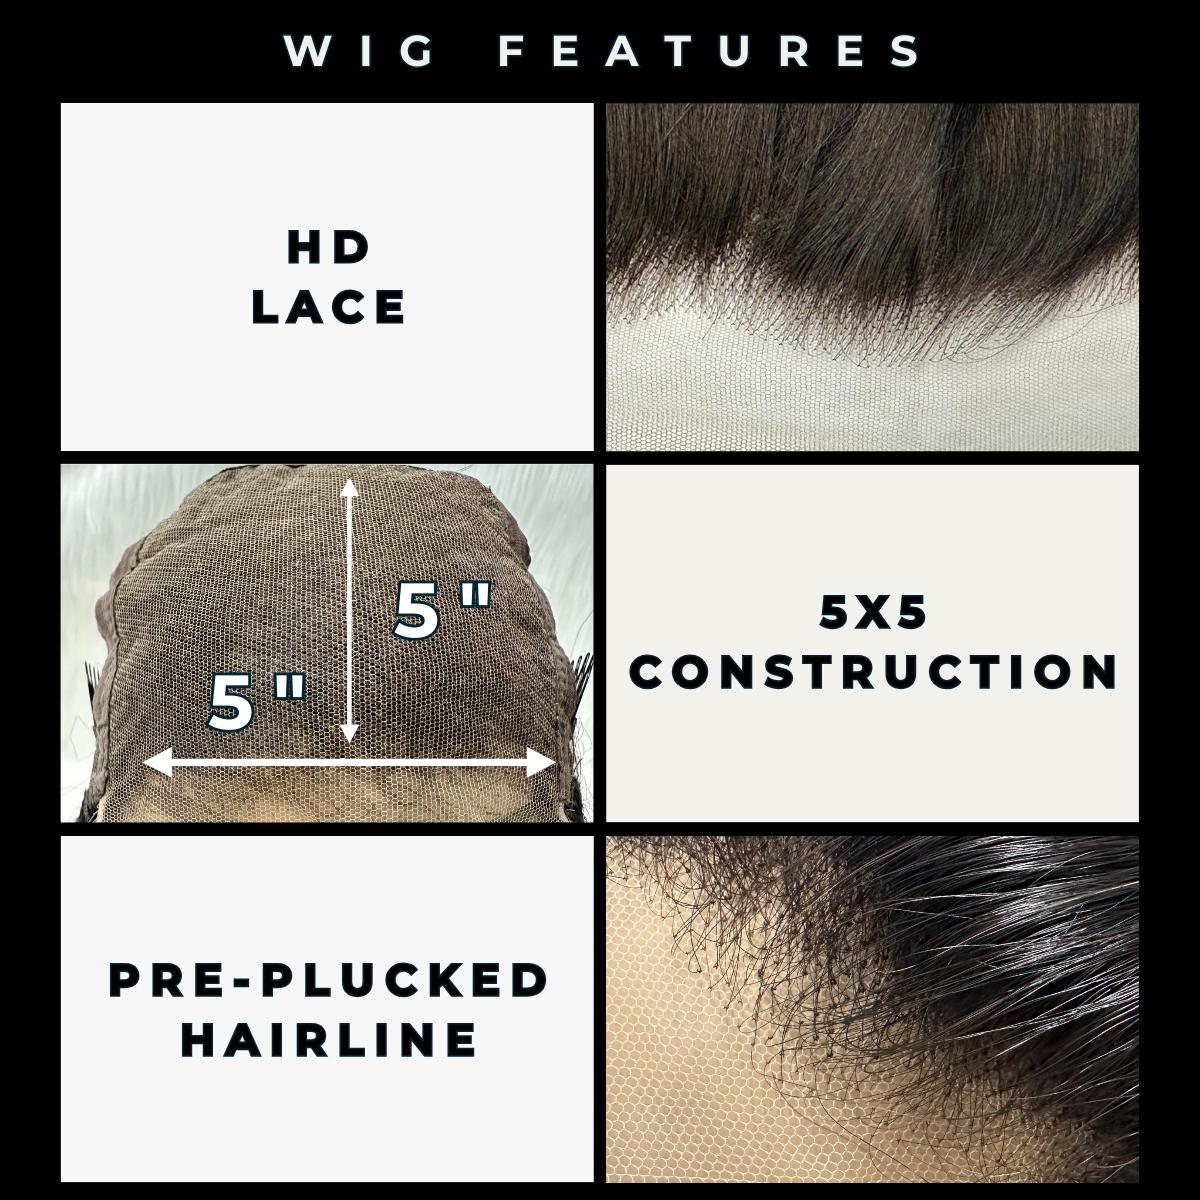 wig features-hd lace-pre plucked hairline